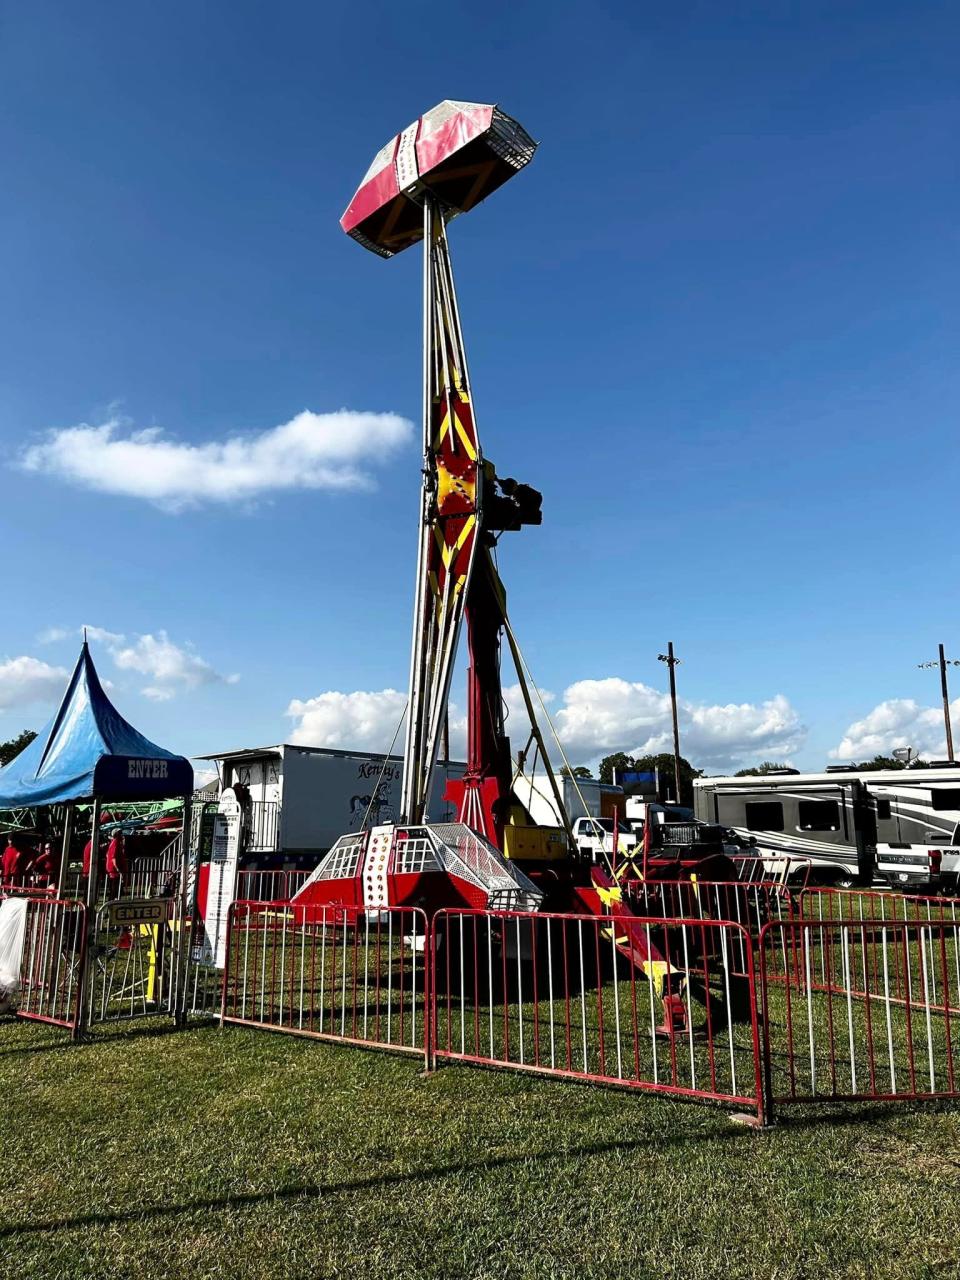 'The Bullet' ride at the Groves Pecan Festival 2023 in Texas.